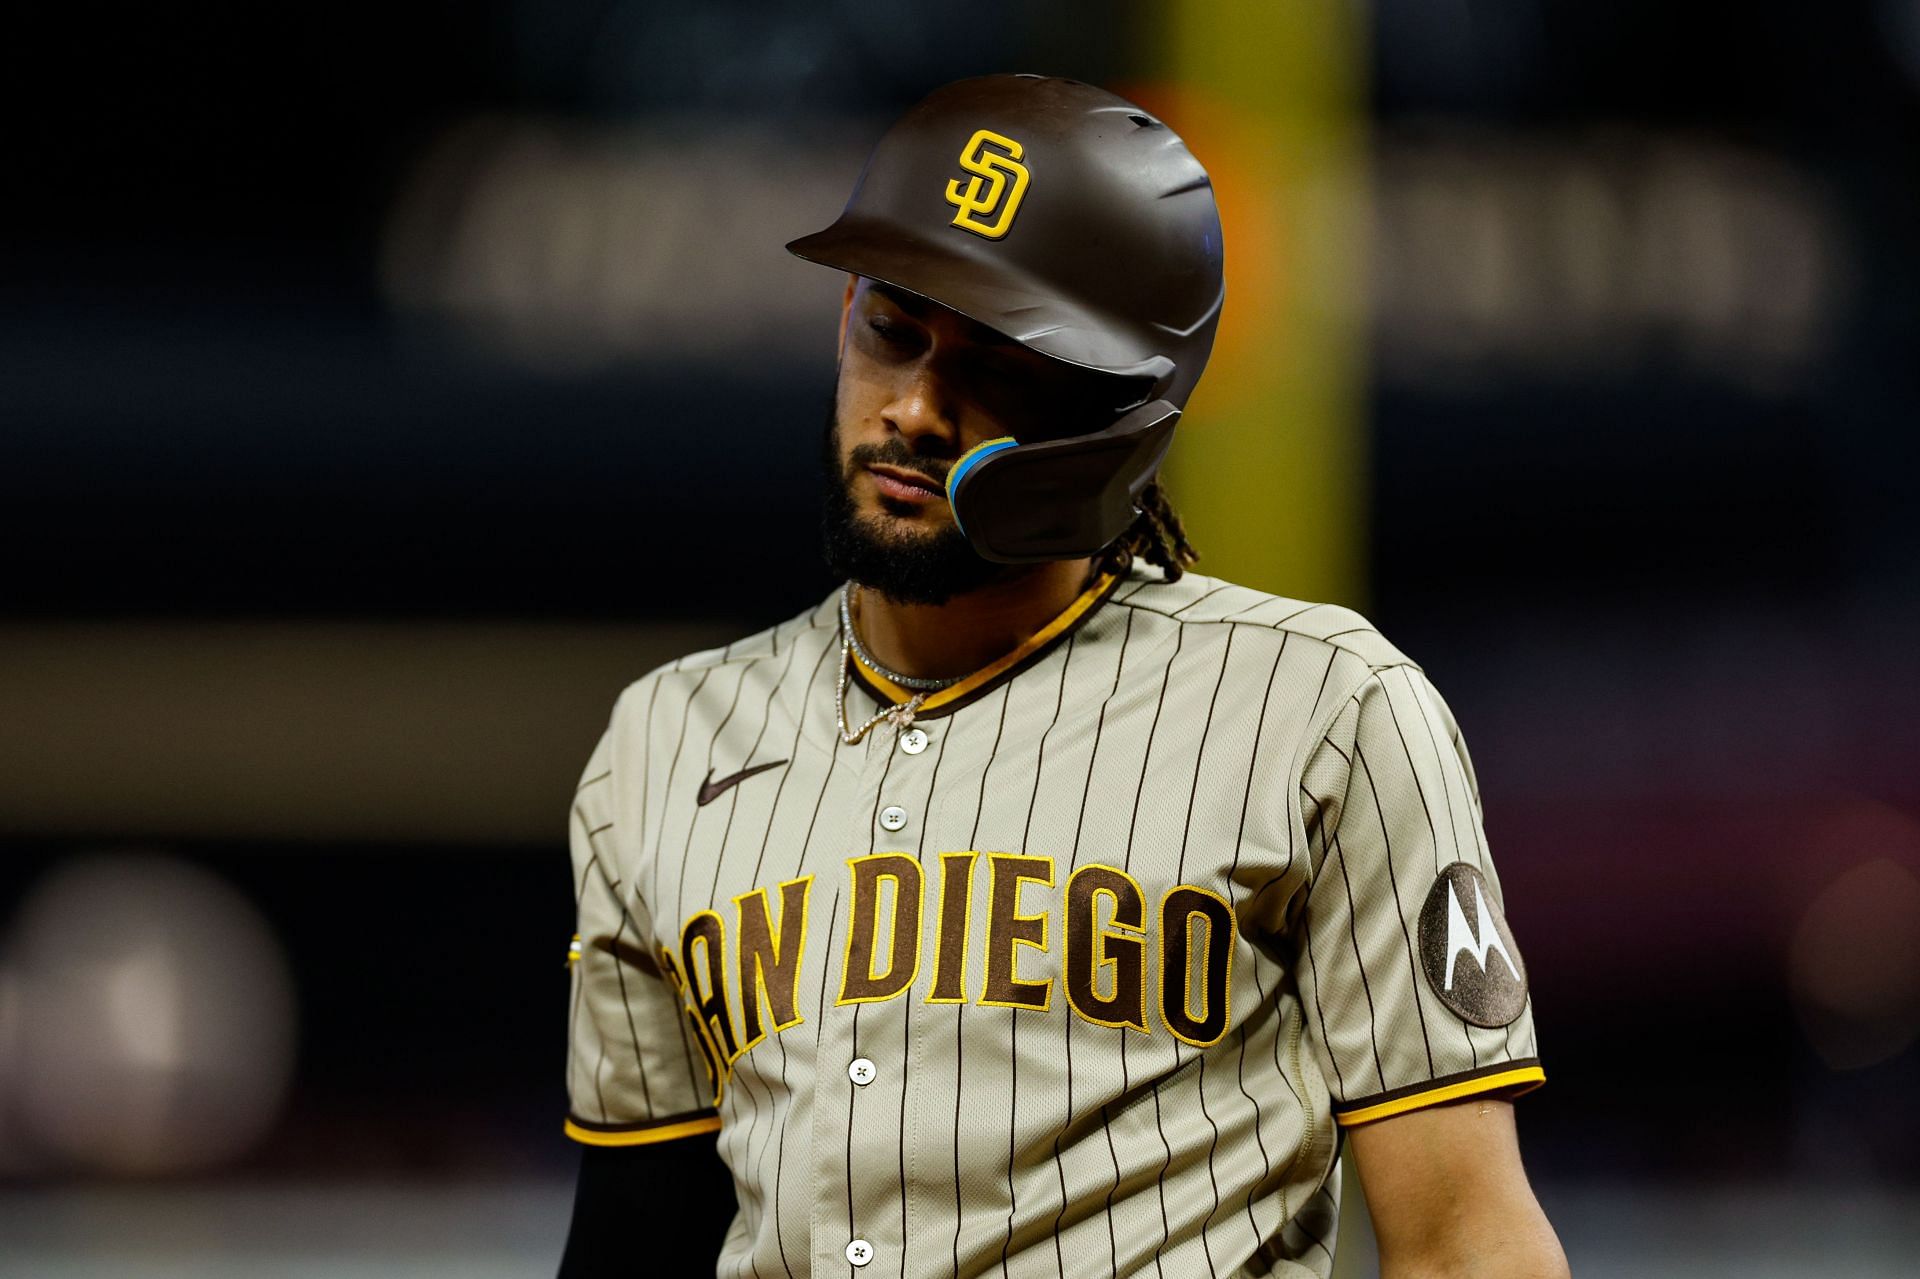 The San Diego Padres do not look good